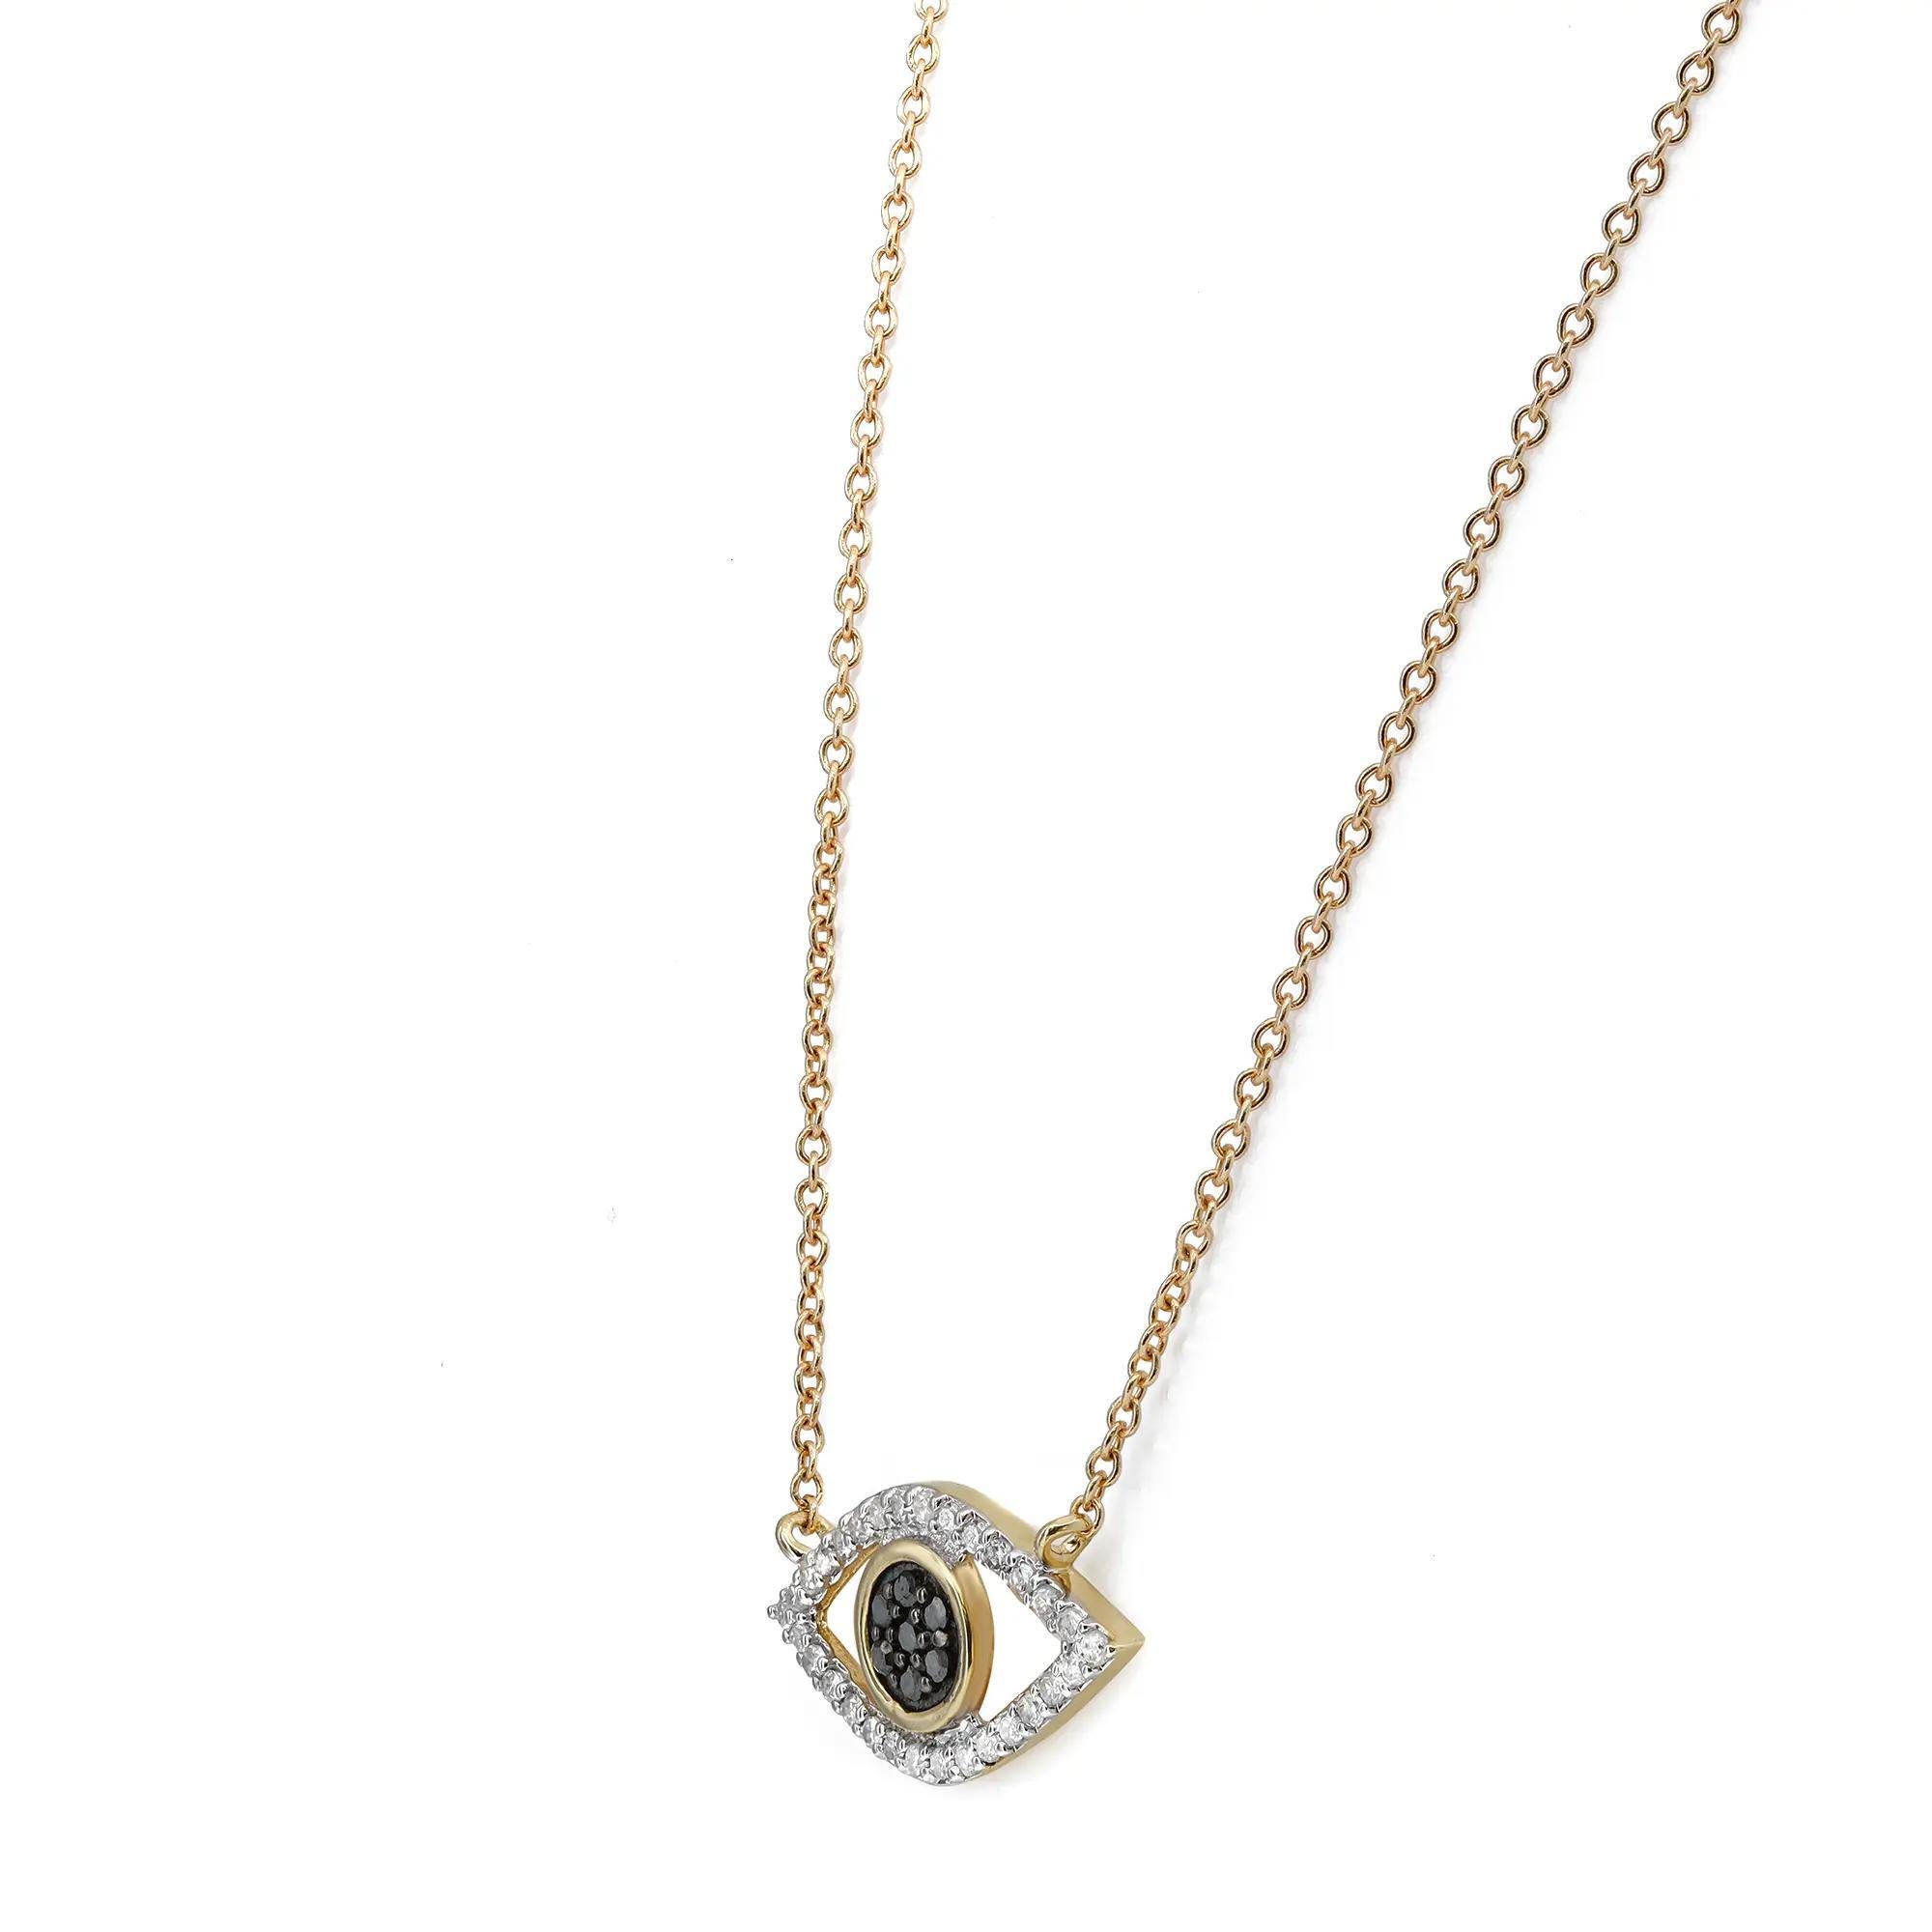 Chic, timeless, and the perfect everyday necklace. Crafted in 14k yellow gold. This necklace features an evil eye pendant studded with pave set black diamonds in the center round shank with white diamonds on the eye shape outline. Total diamond